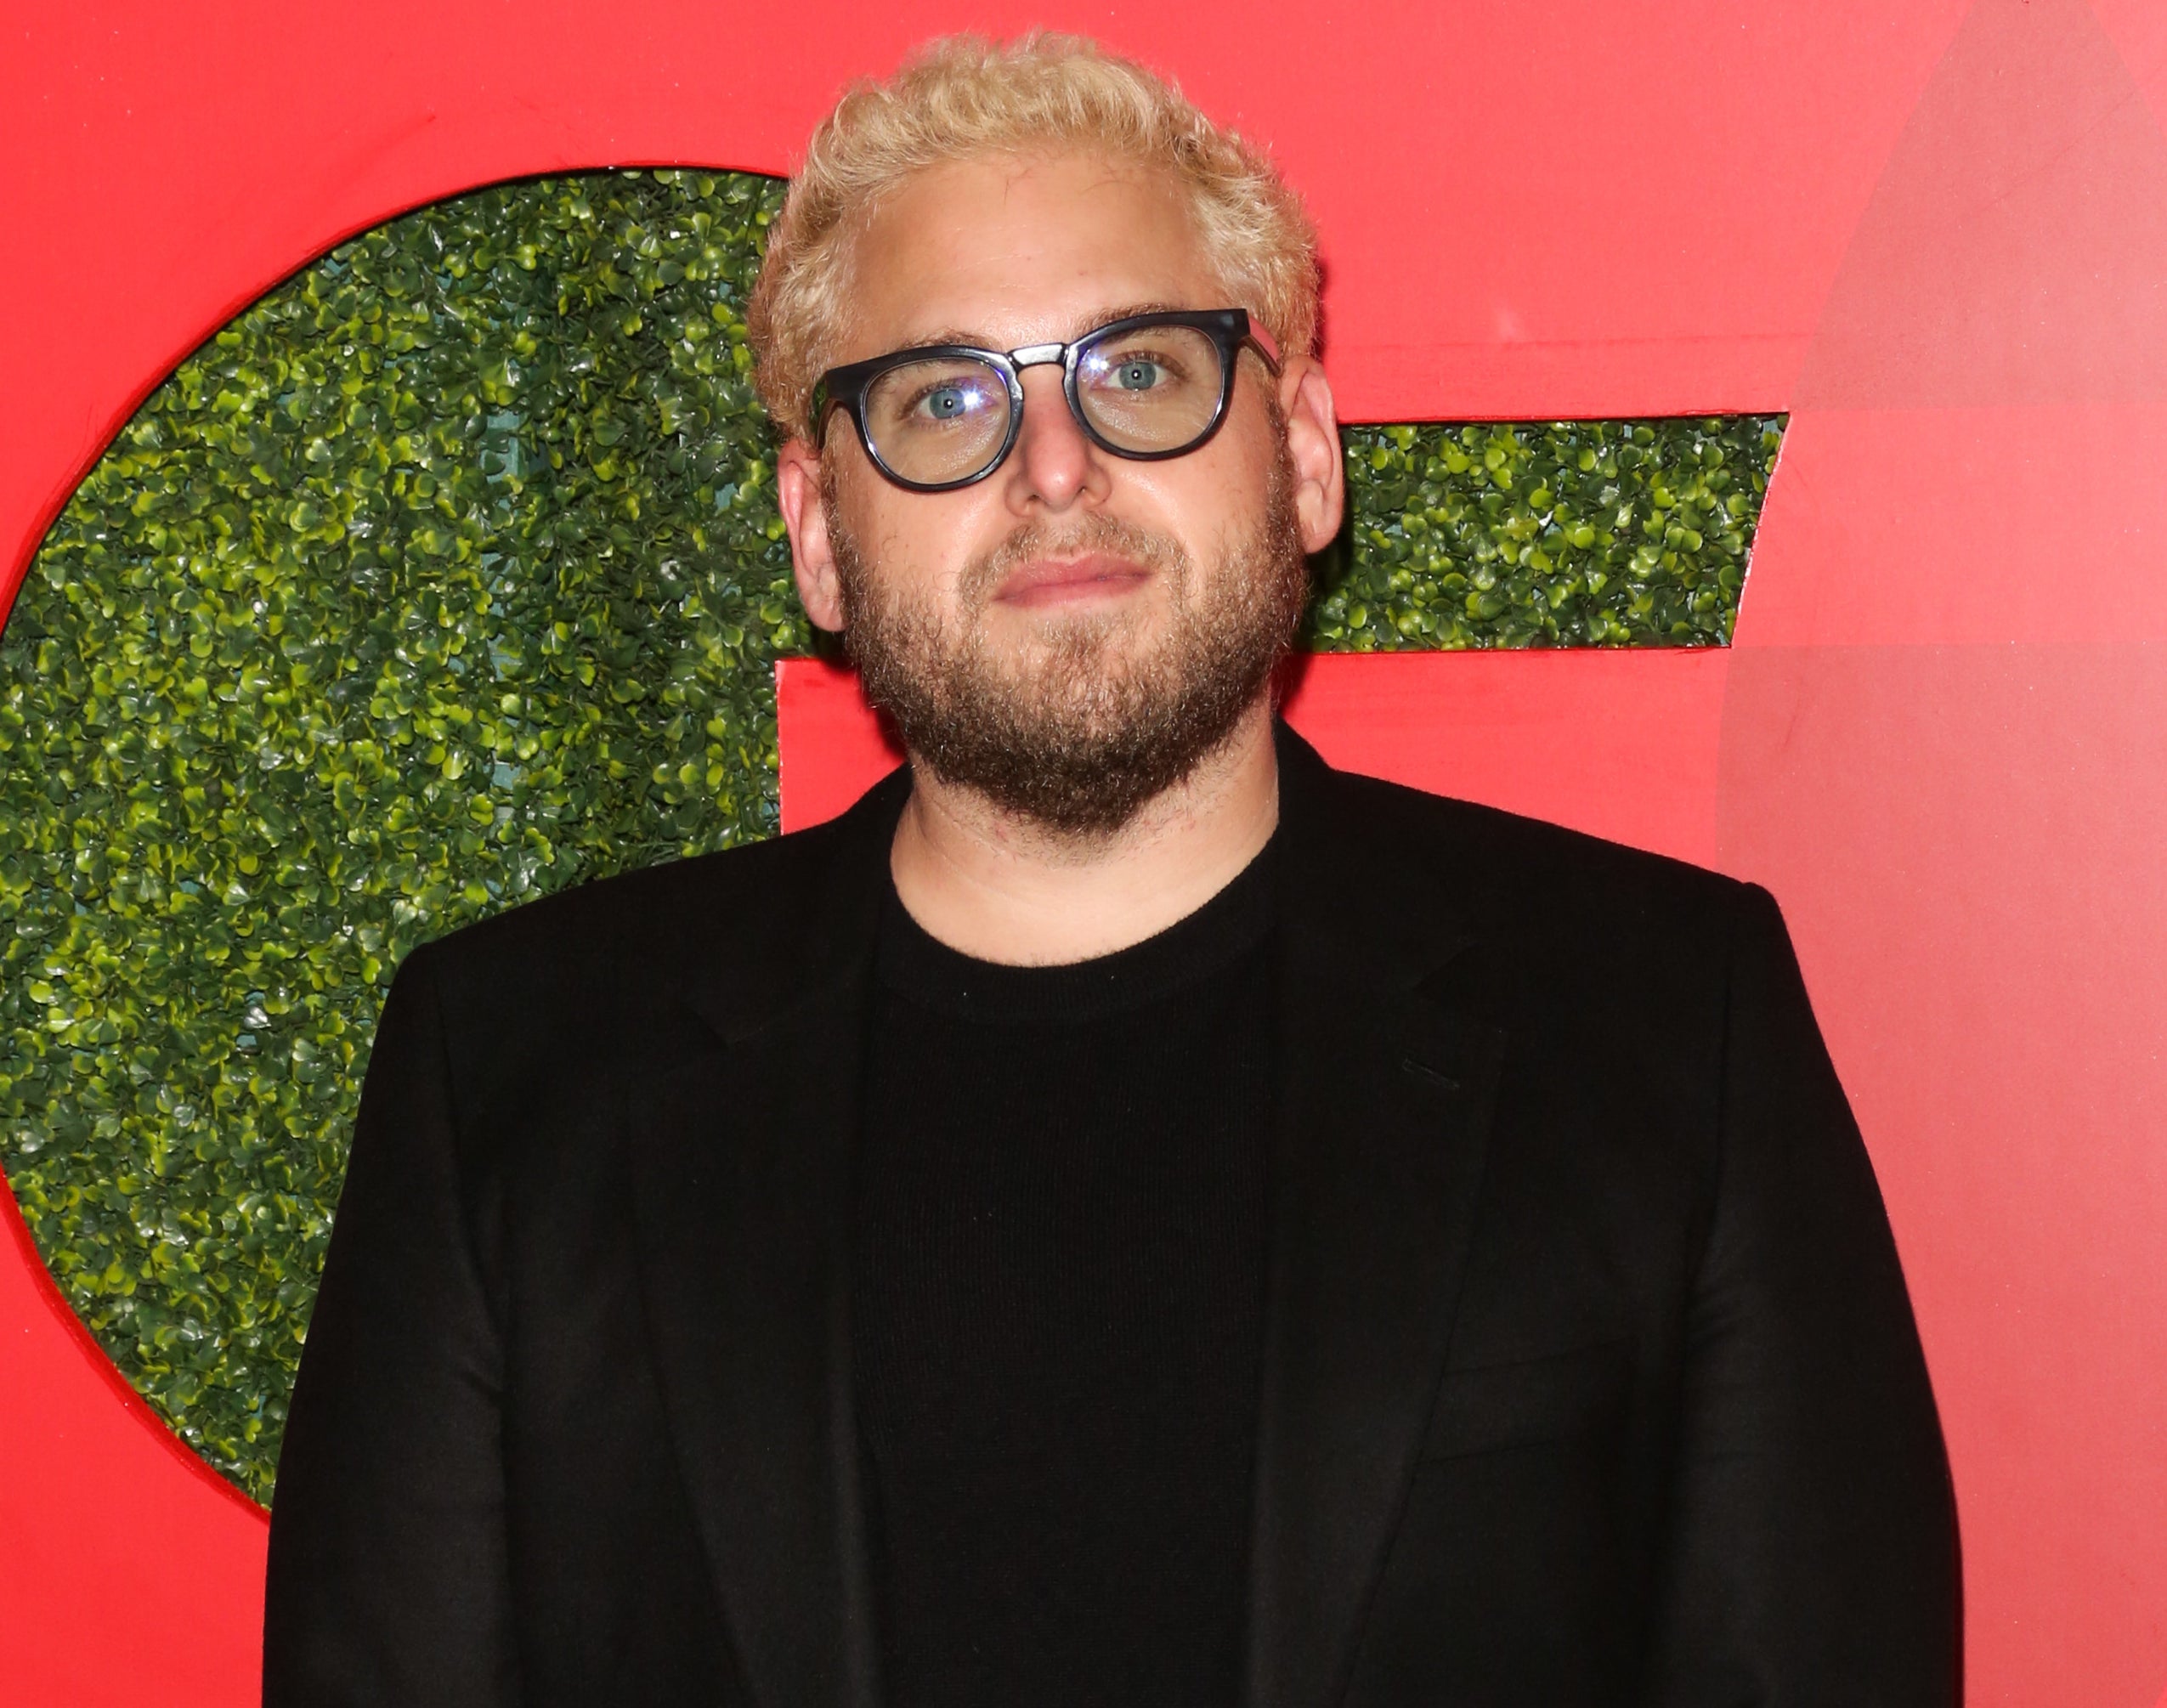 Jonah, with bleached hair, wears a black tee with black blazer